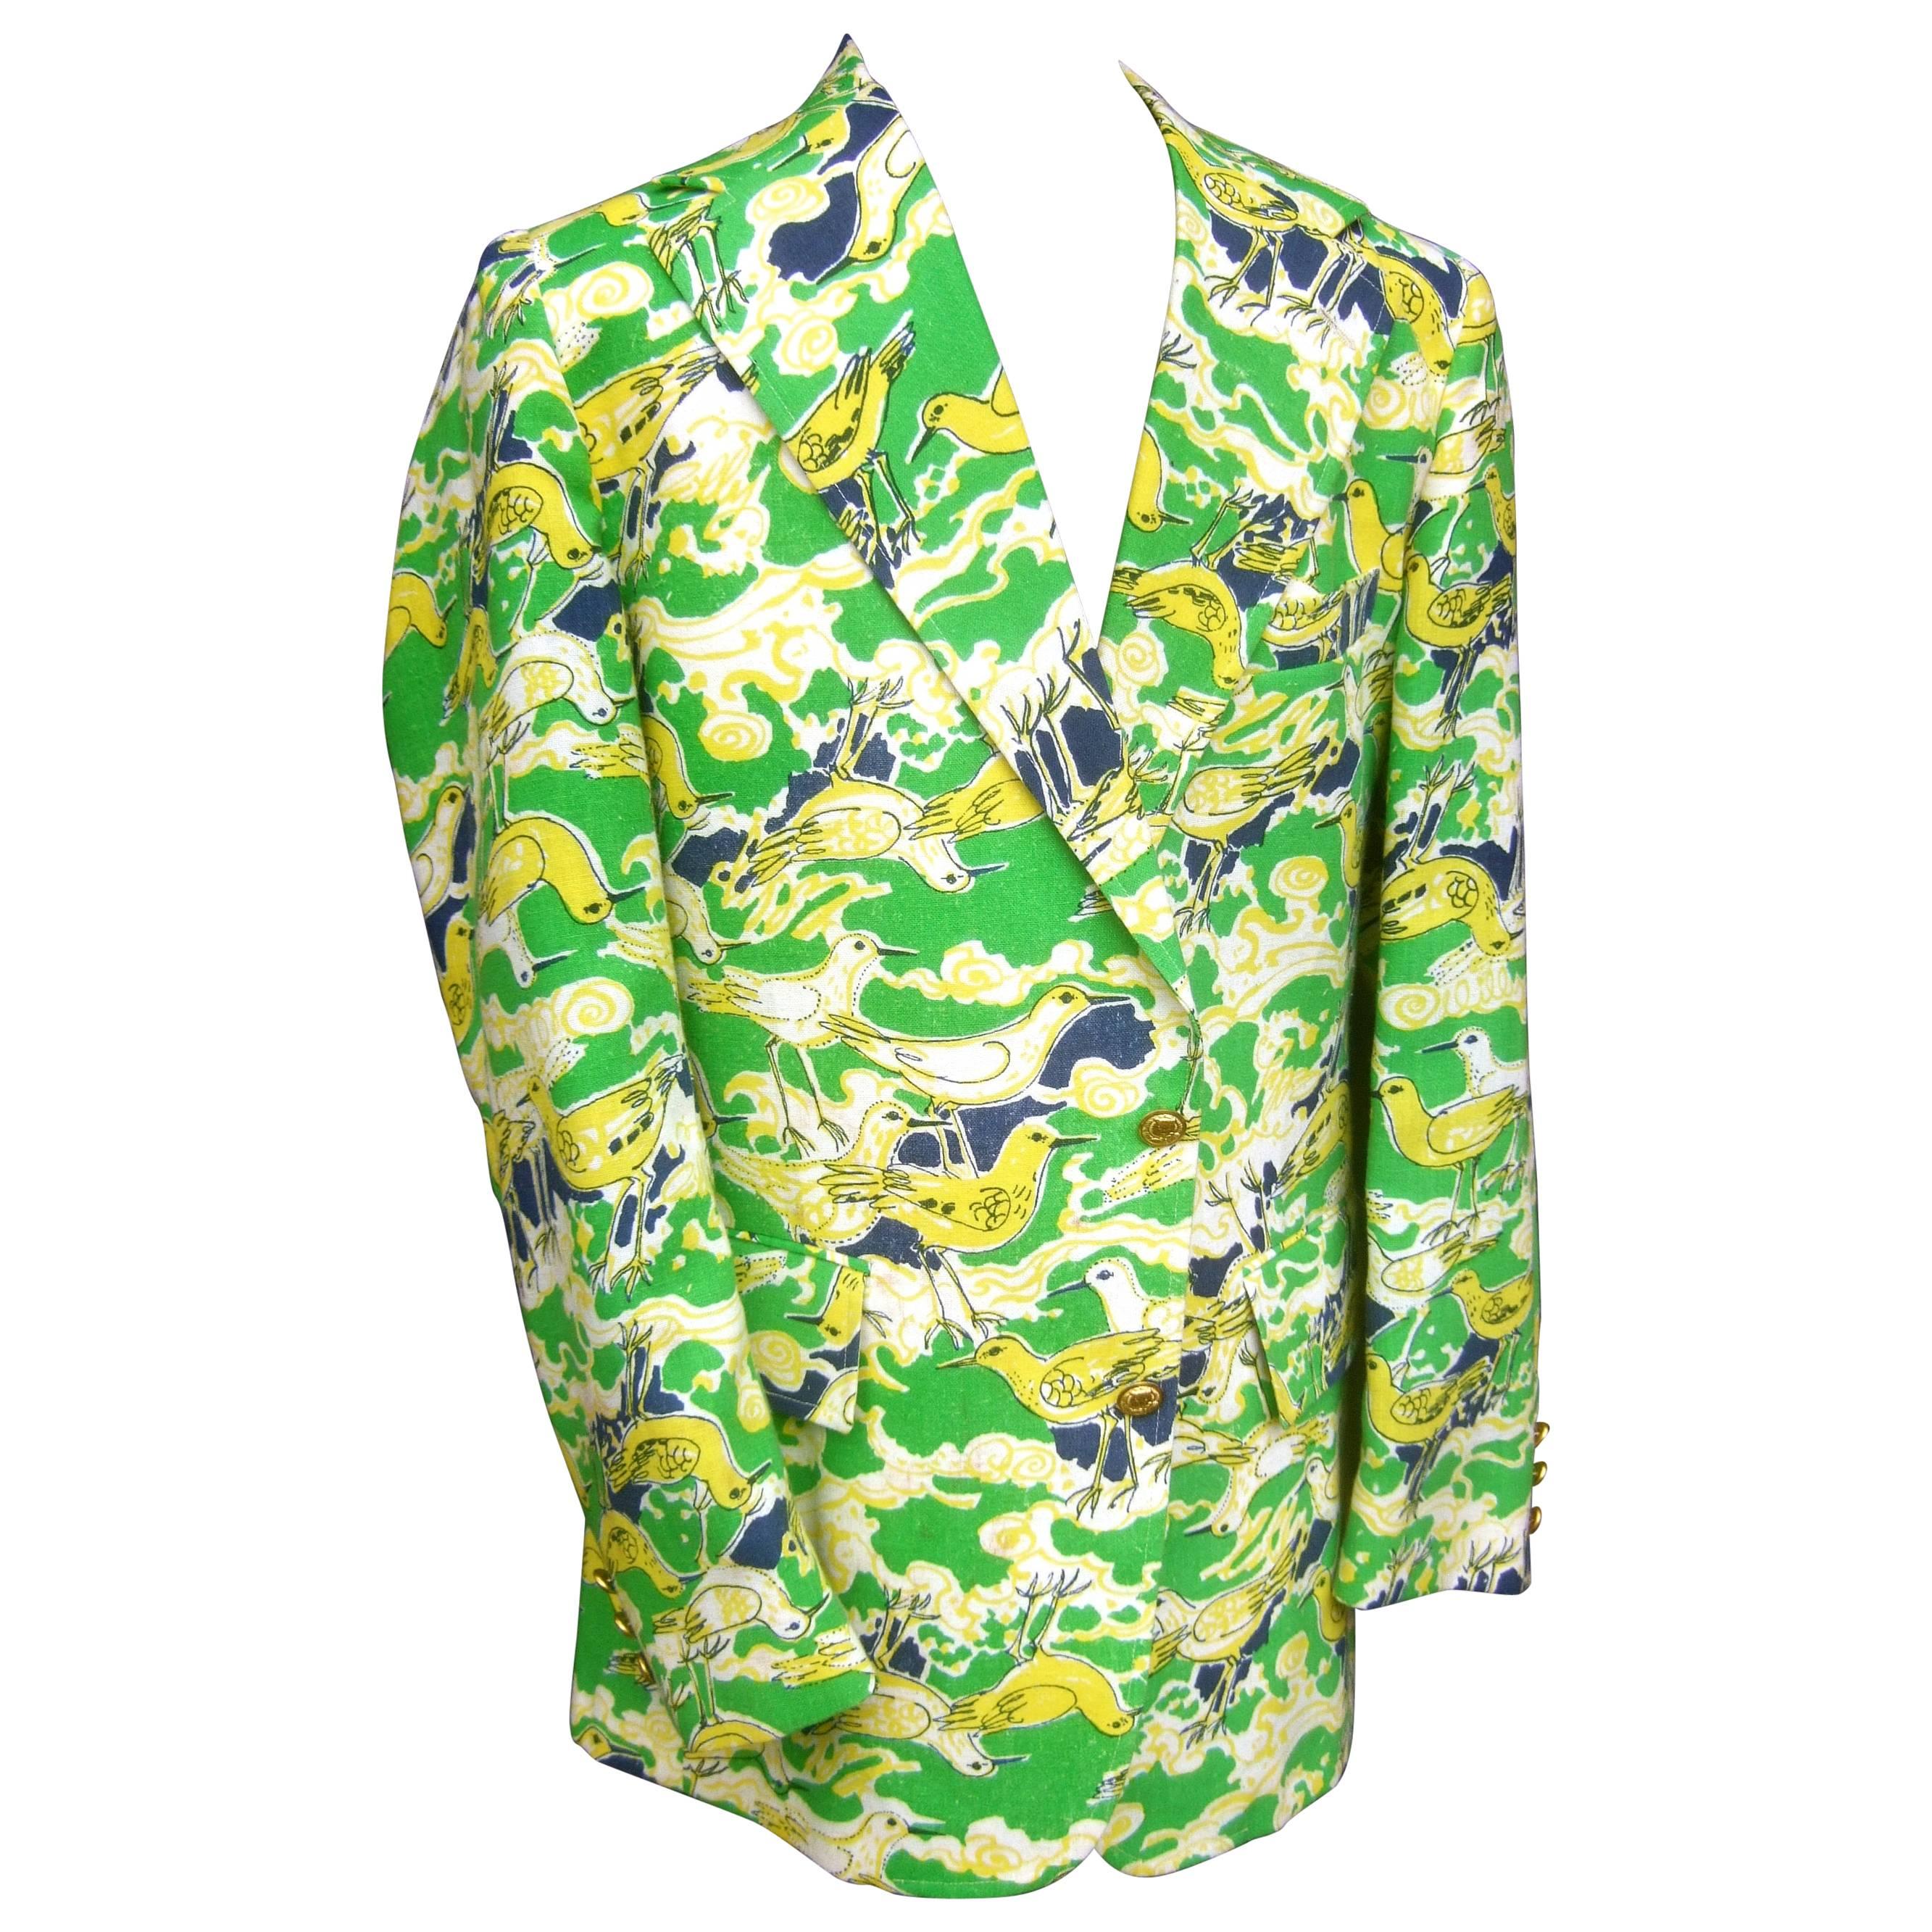 Lilly Pulitzer Men's Whimsical Seagull Print Jacket ca 1970